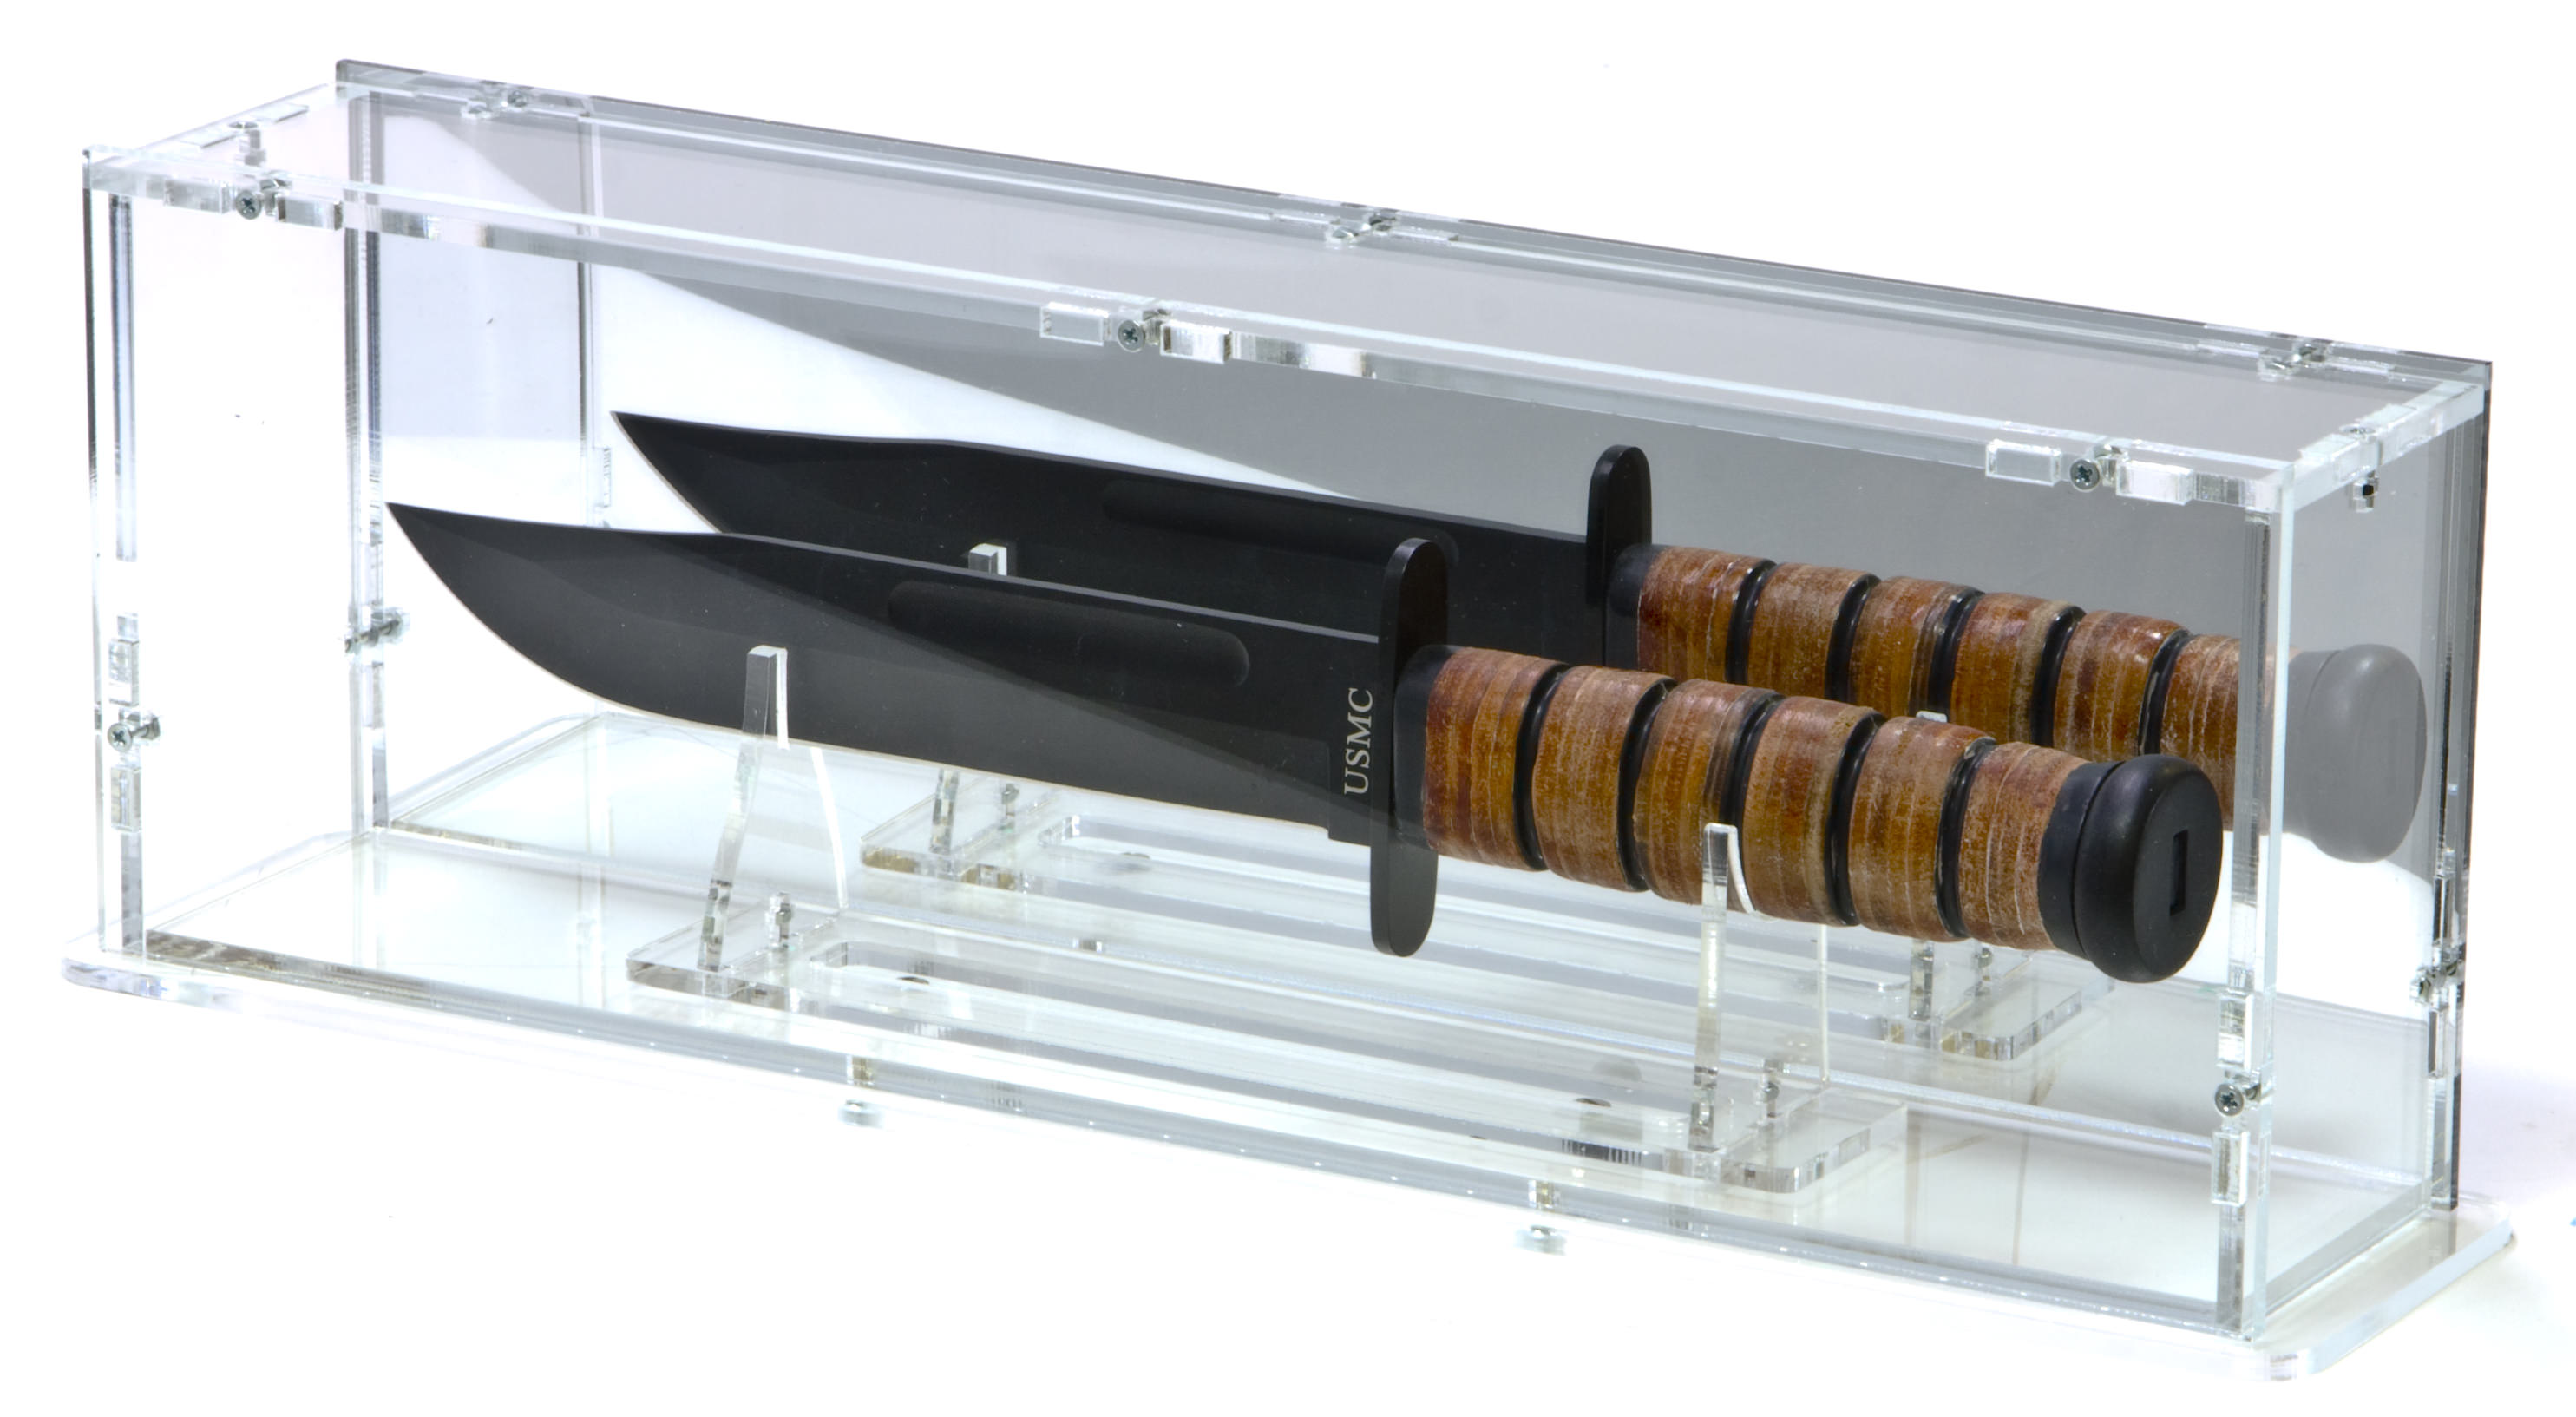 Knife Display Case with Mirrored Back-Panel | Knives | Display Cases ...